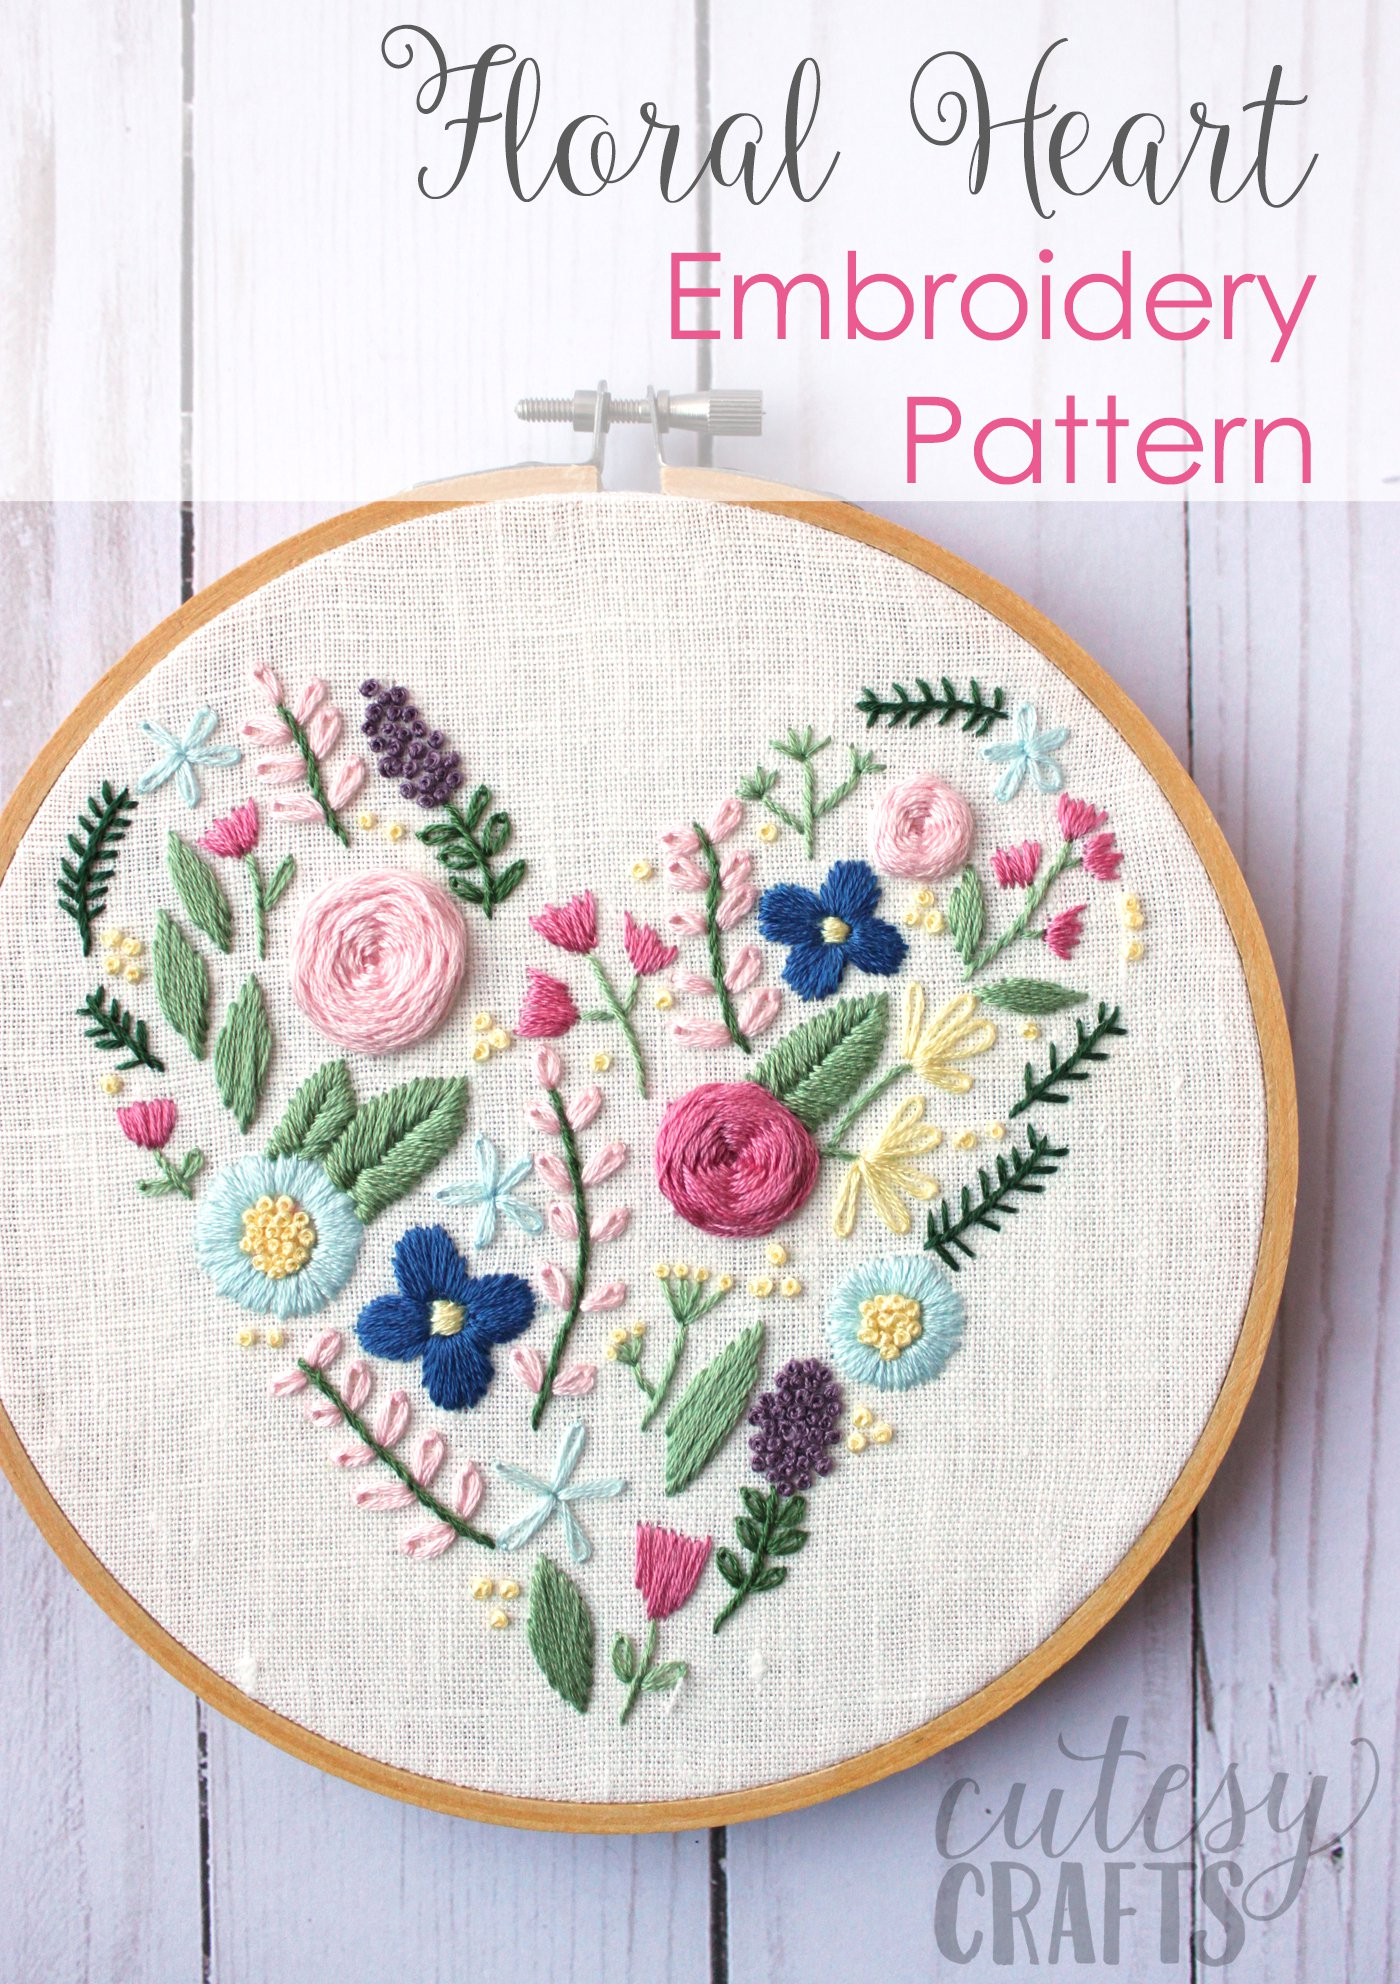 New Hand Embroidery Patterns Floral Heart Hand Embroidery Pattern The Polka Dot Chair